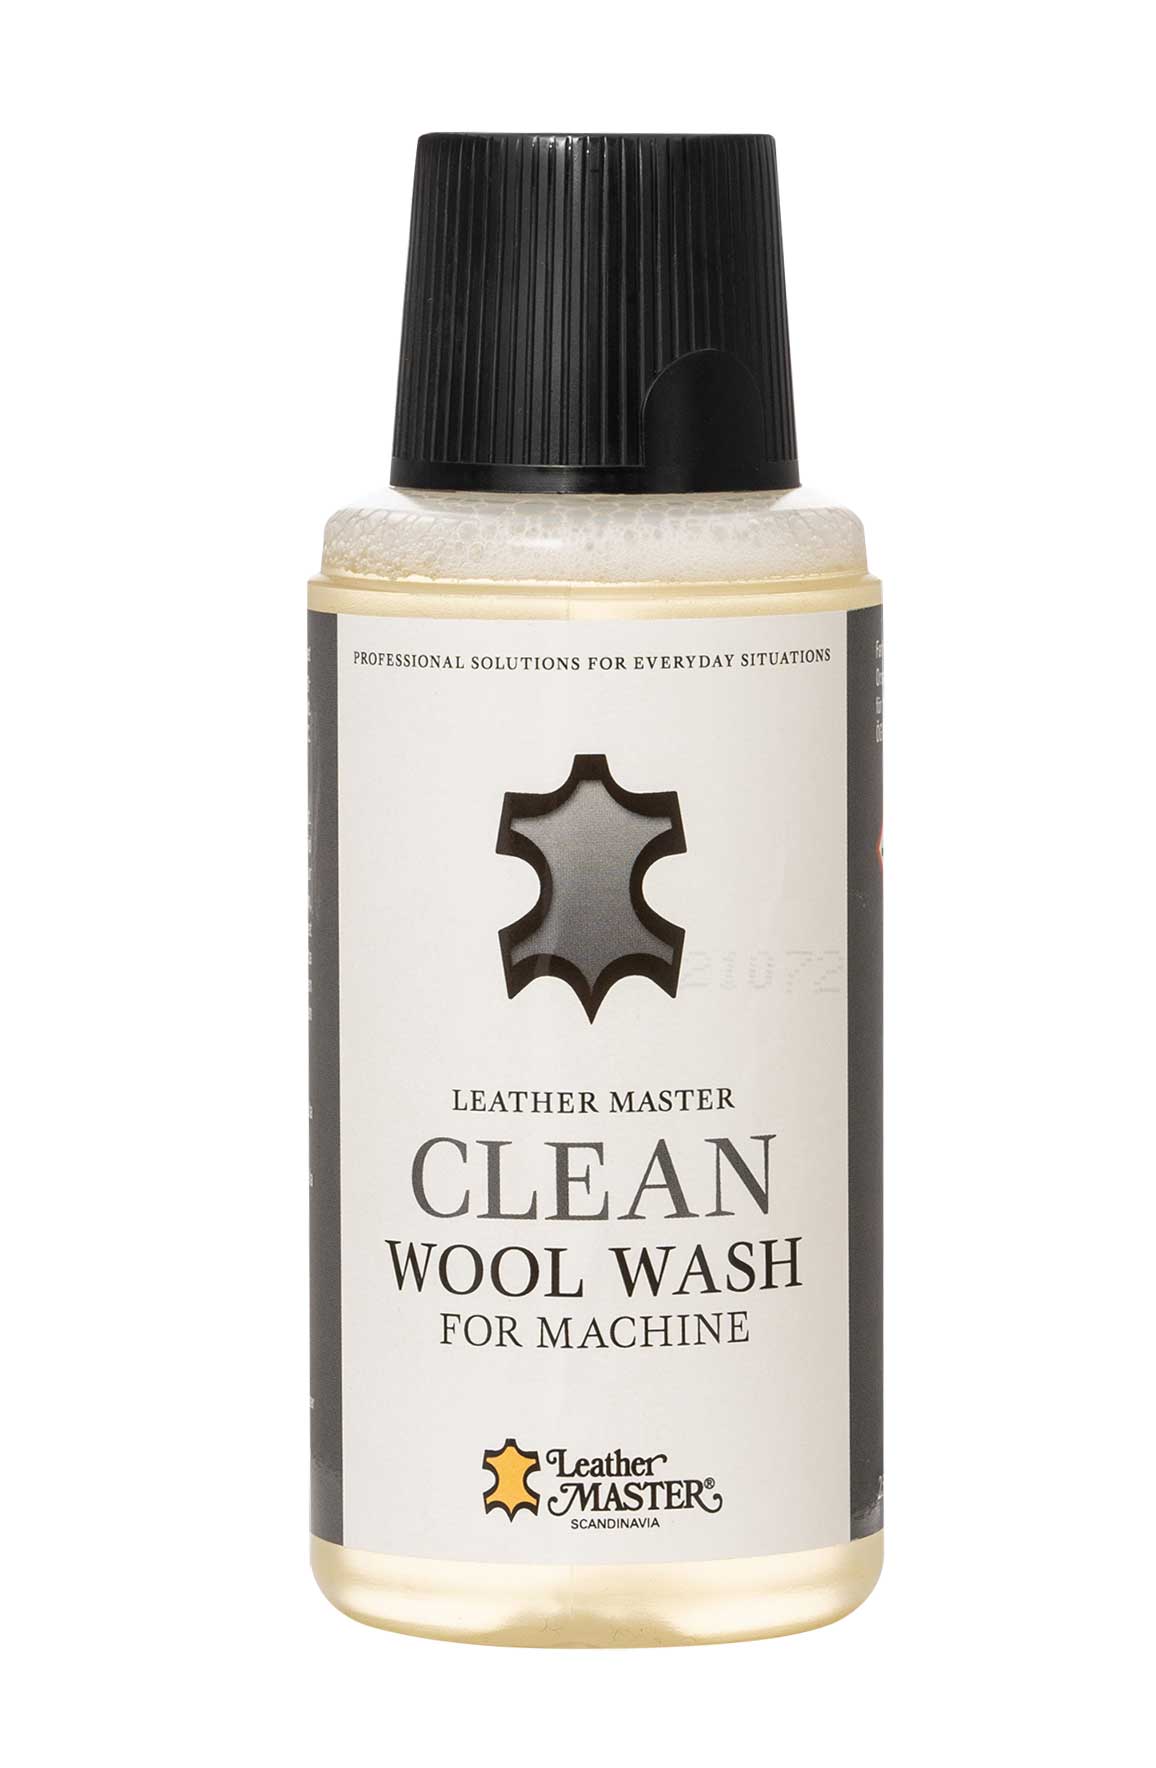 Leather Master Wool Wash